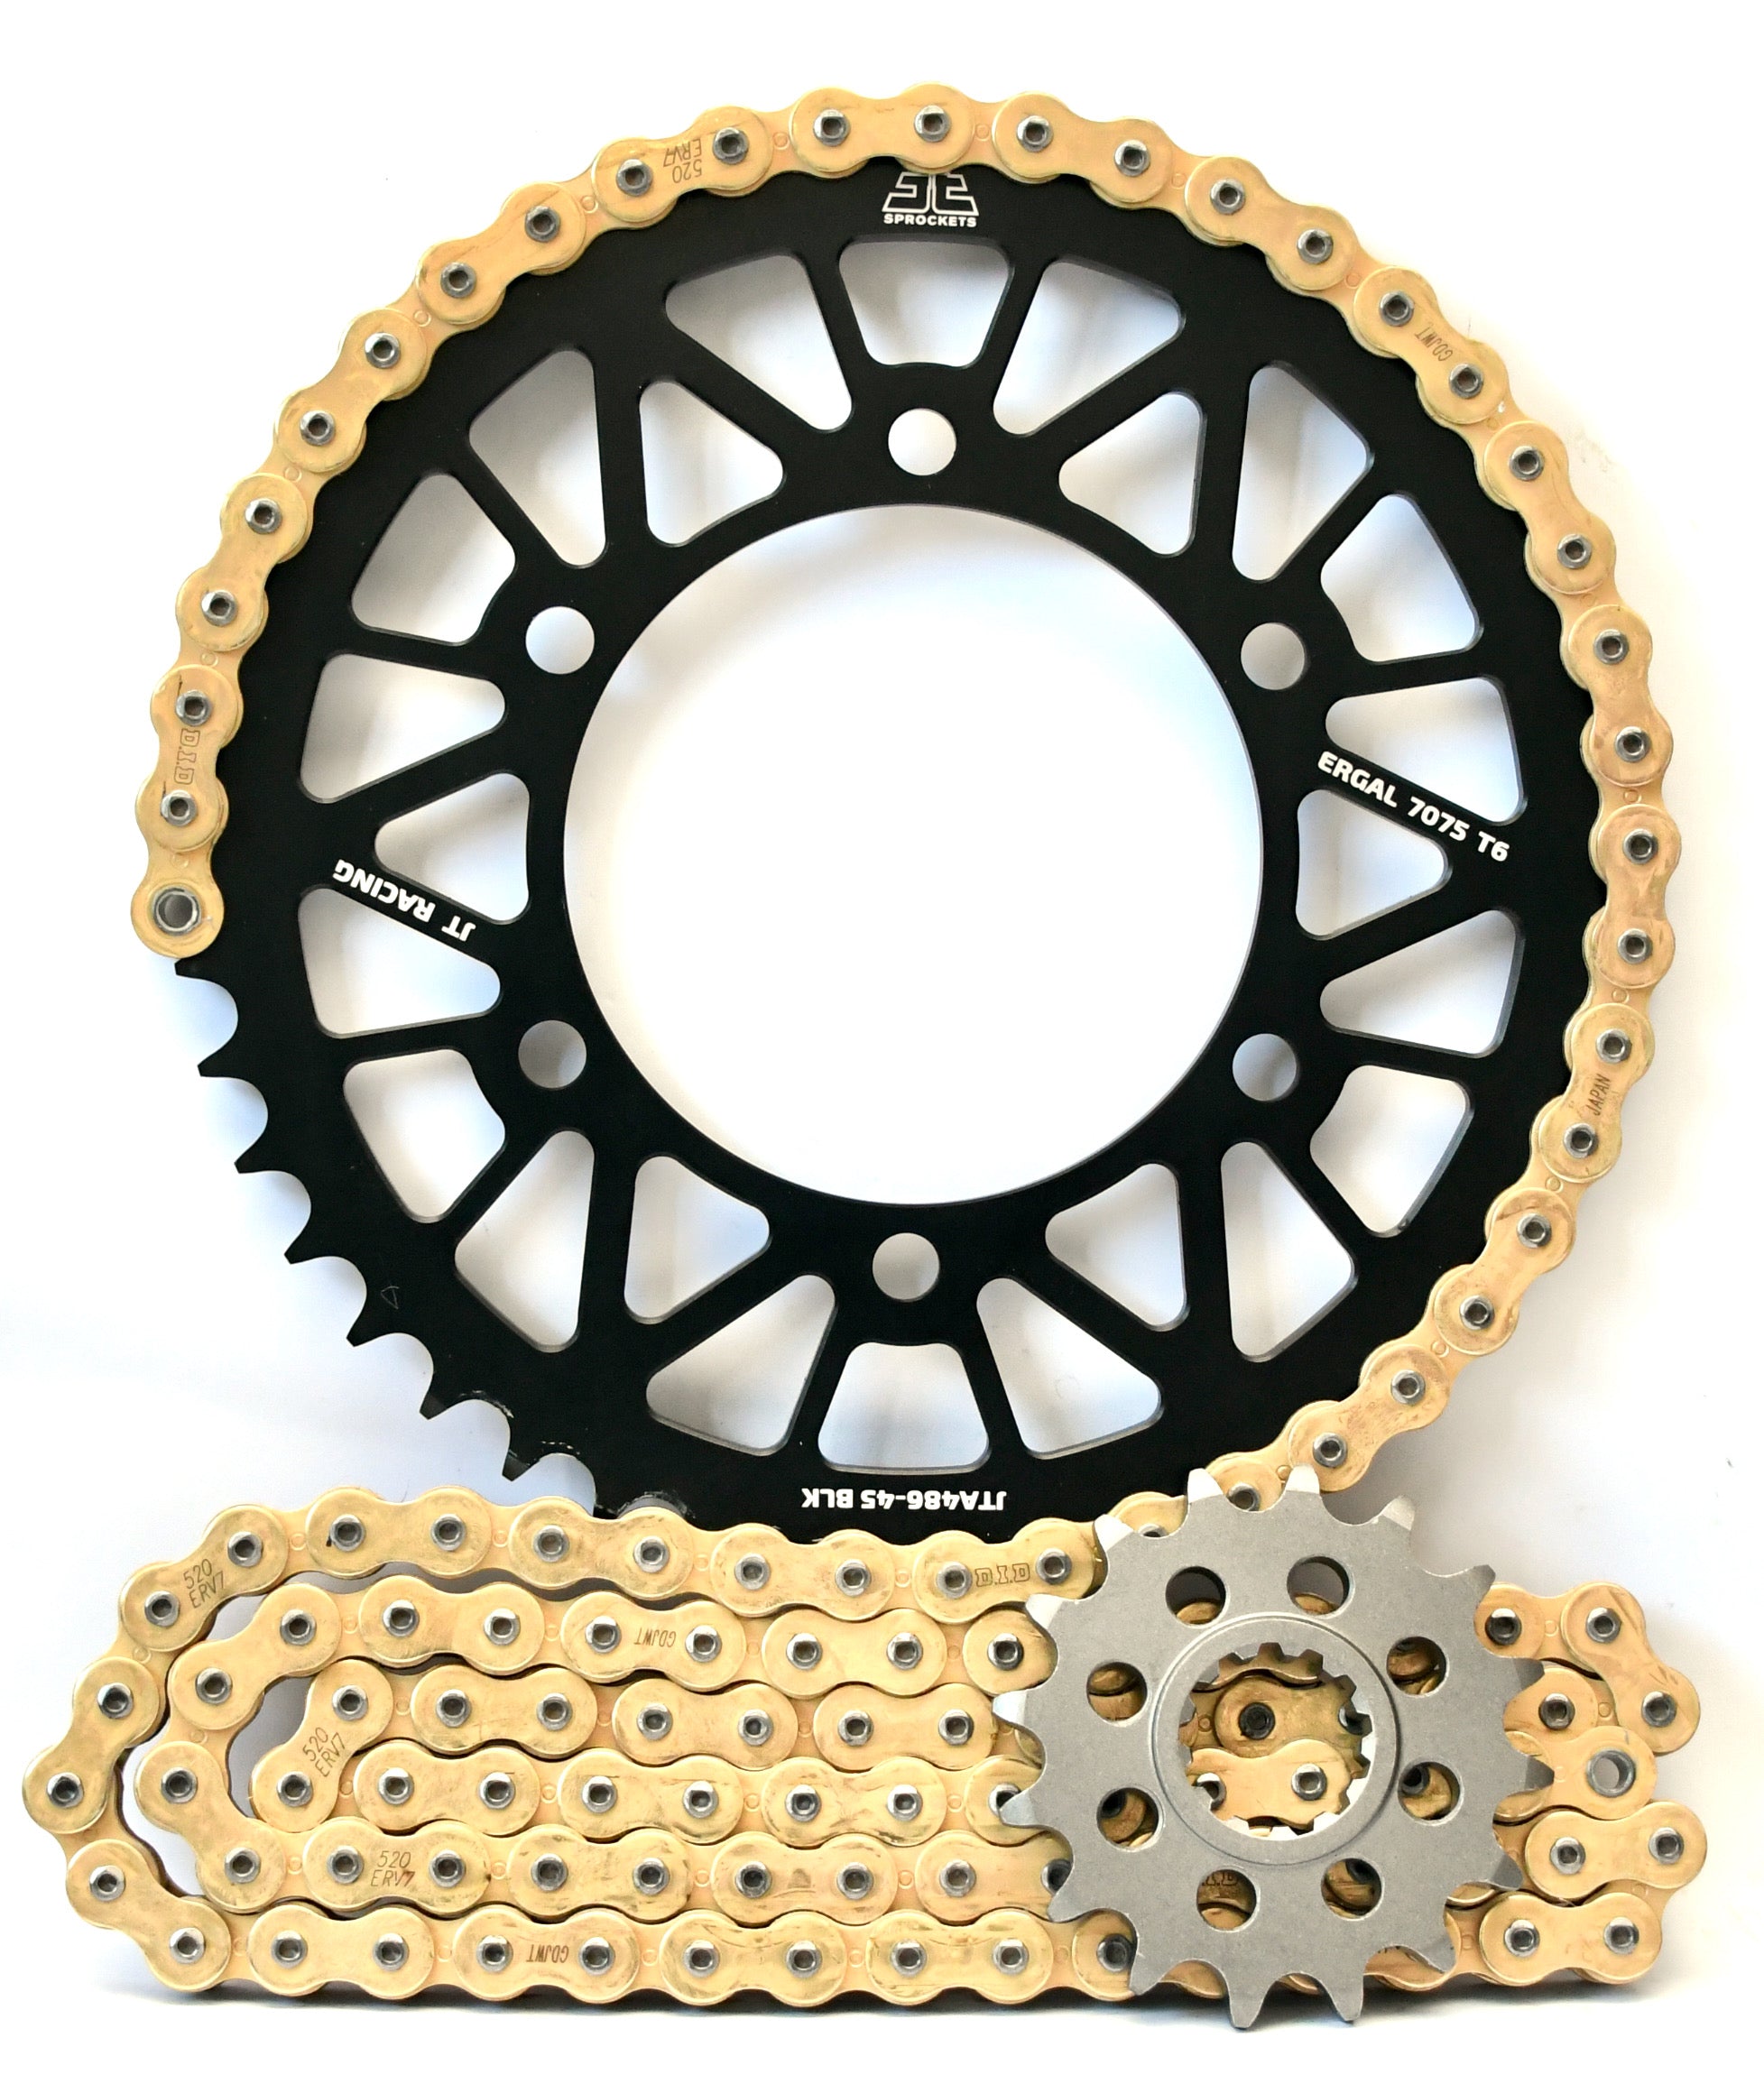 JT Racelite and DID 520 Conversion Chain & Sprocket Kit for Kawasaki ZX-10R 2006-2007 - Standard Gearing